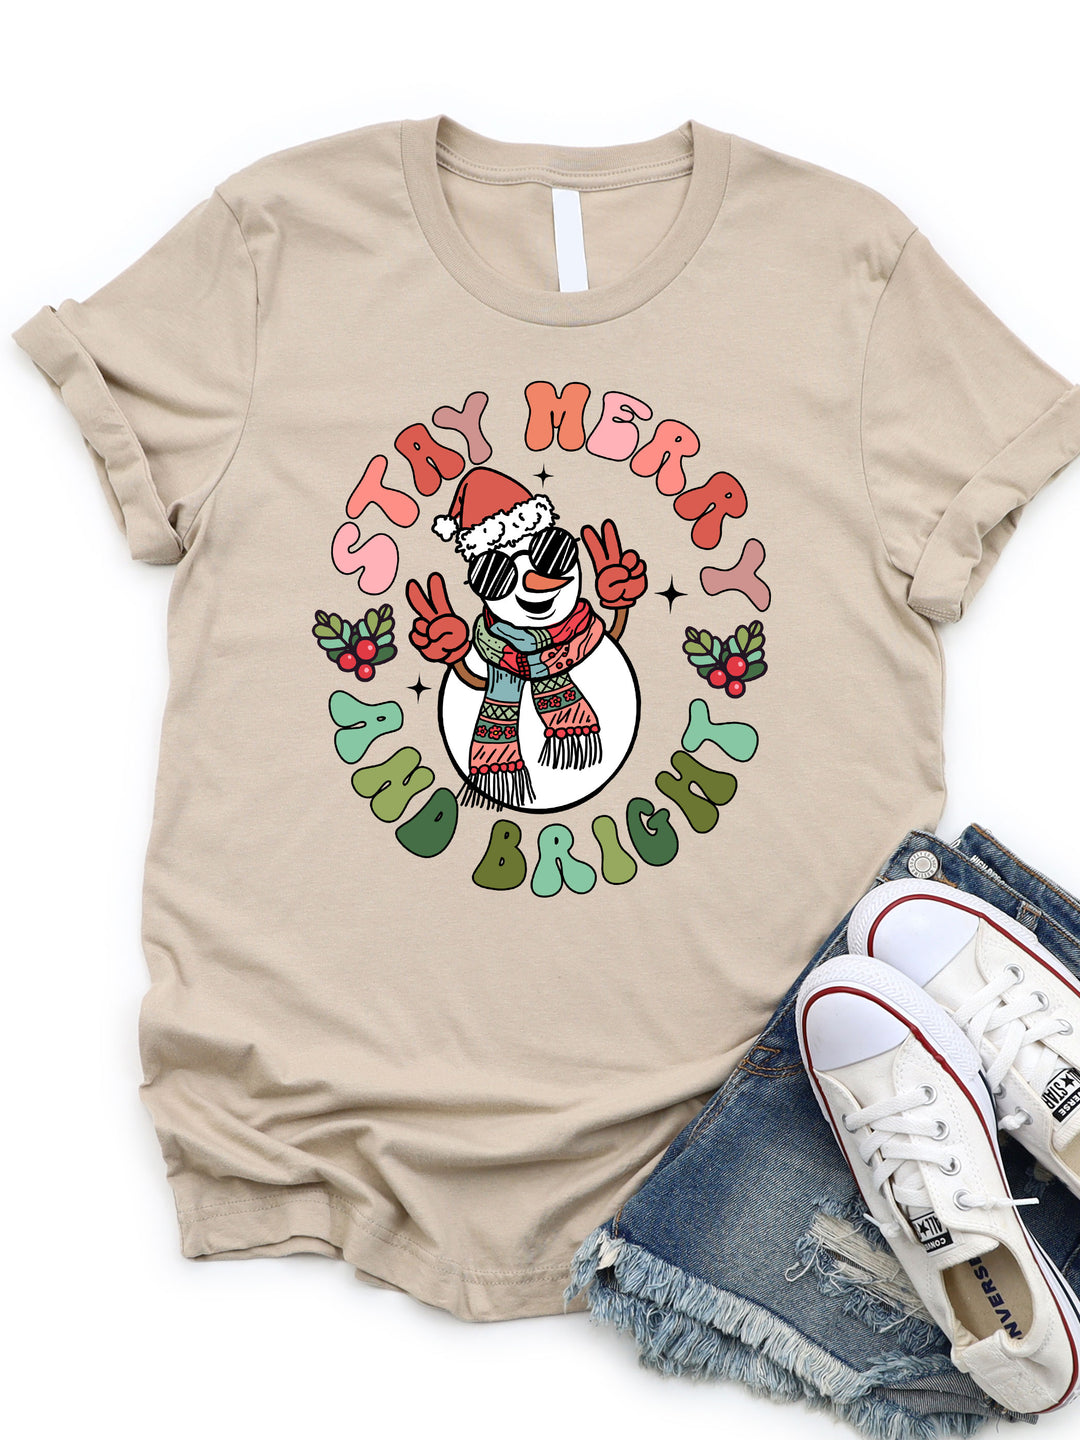 Stay Merry & Bright Snowman Graphic Tee